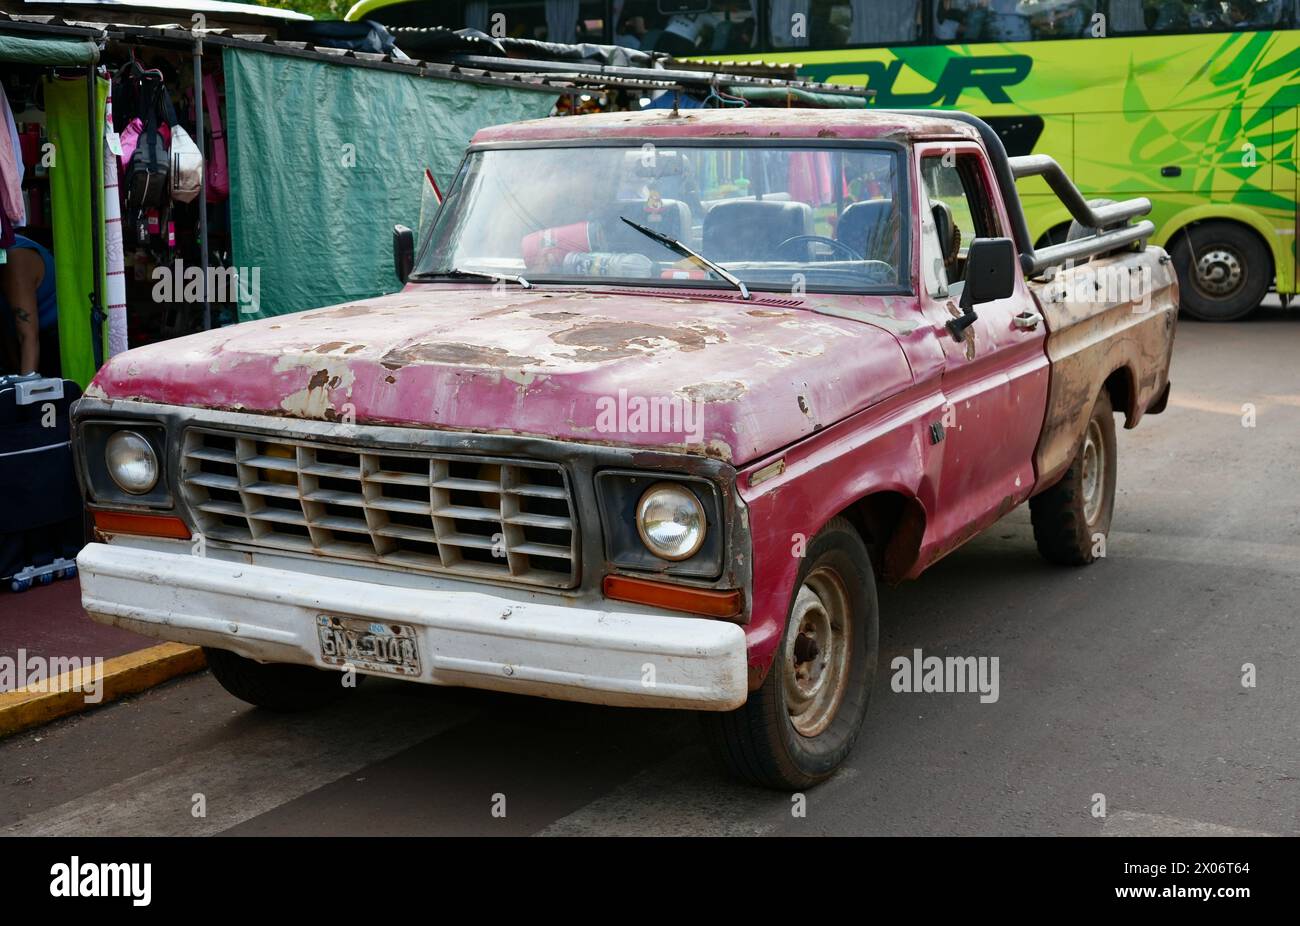 Vintage rusty red Ford F100 pickup truck. Stock Photo